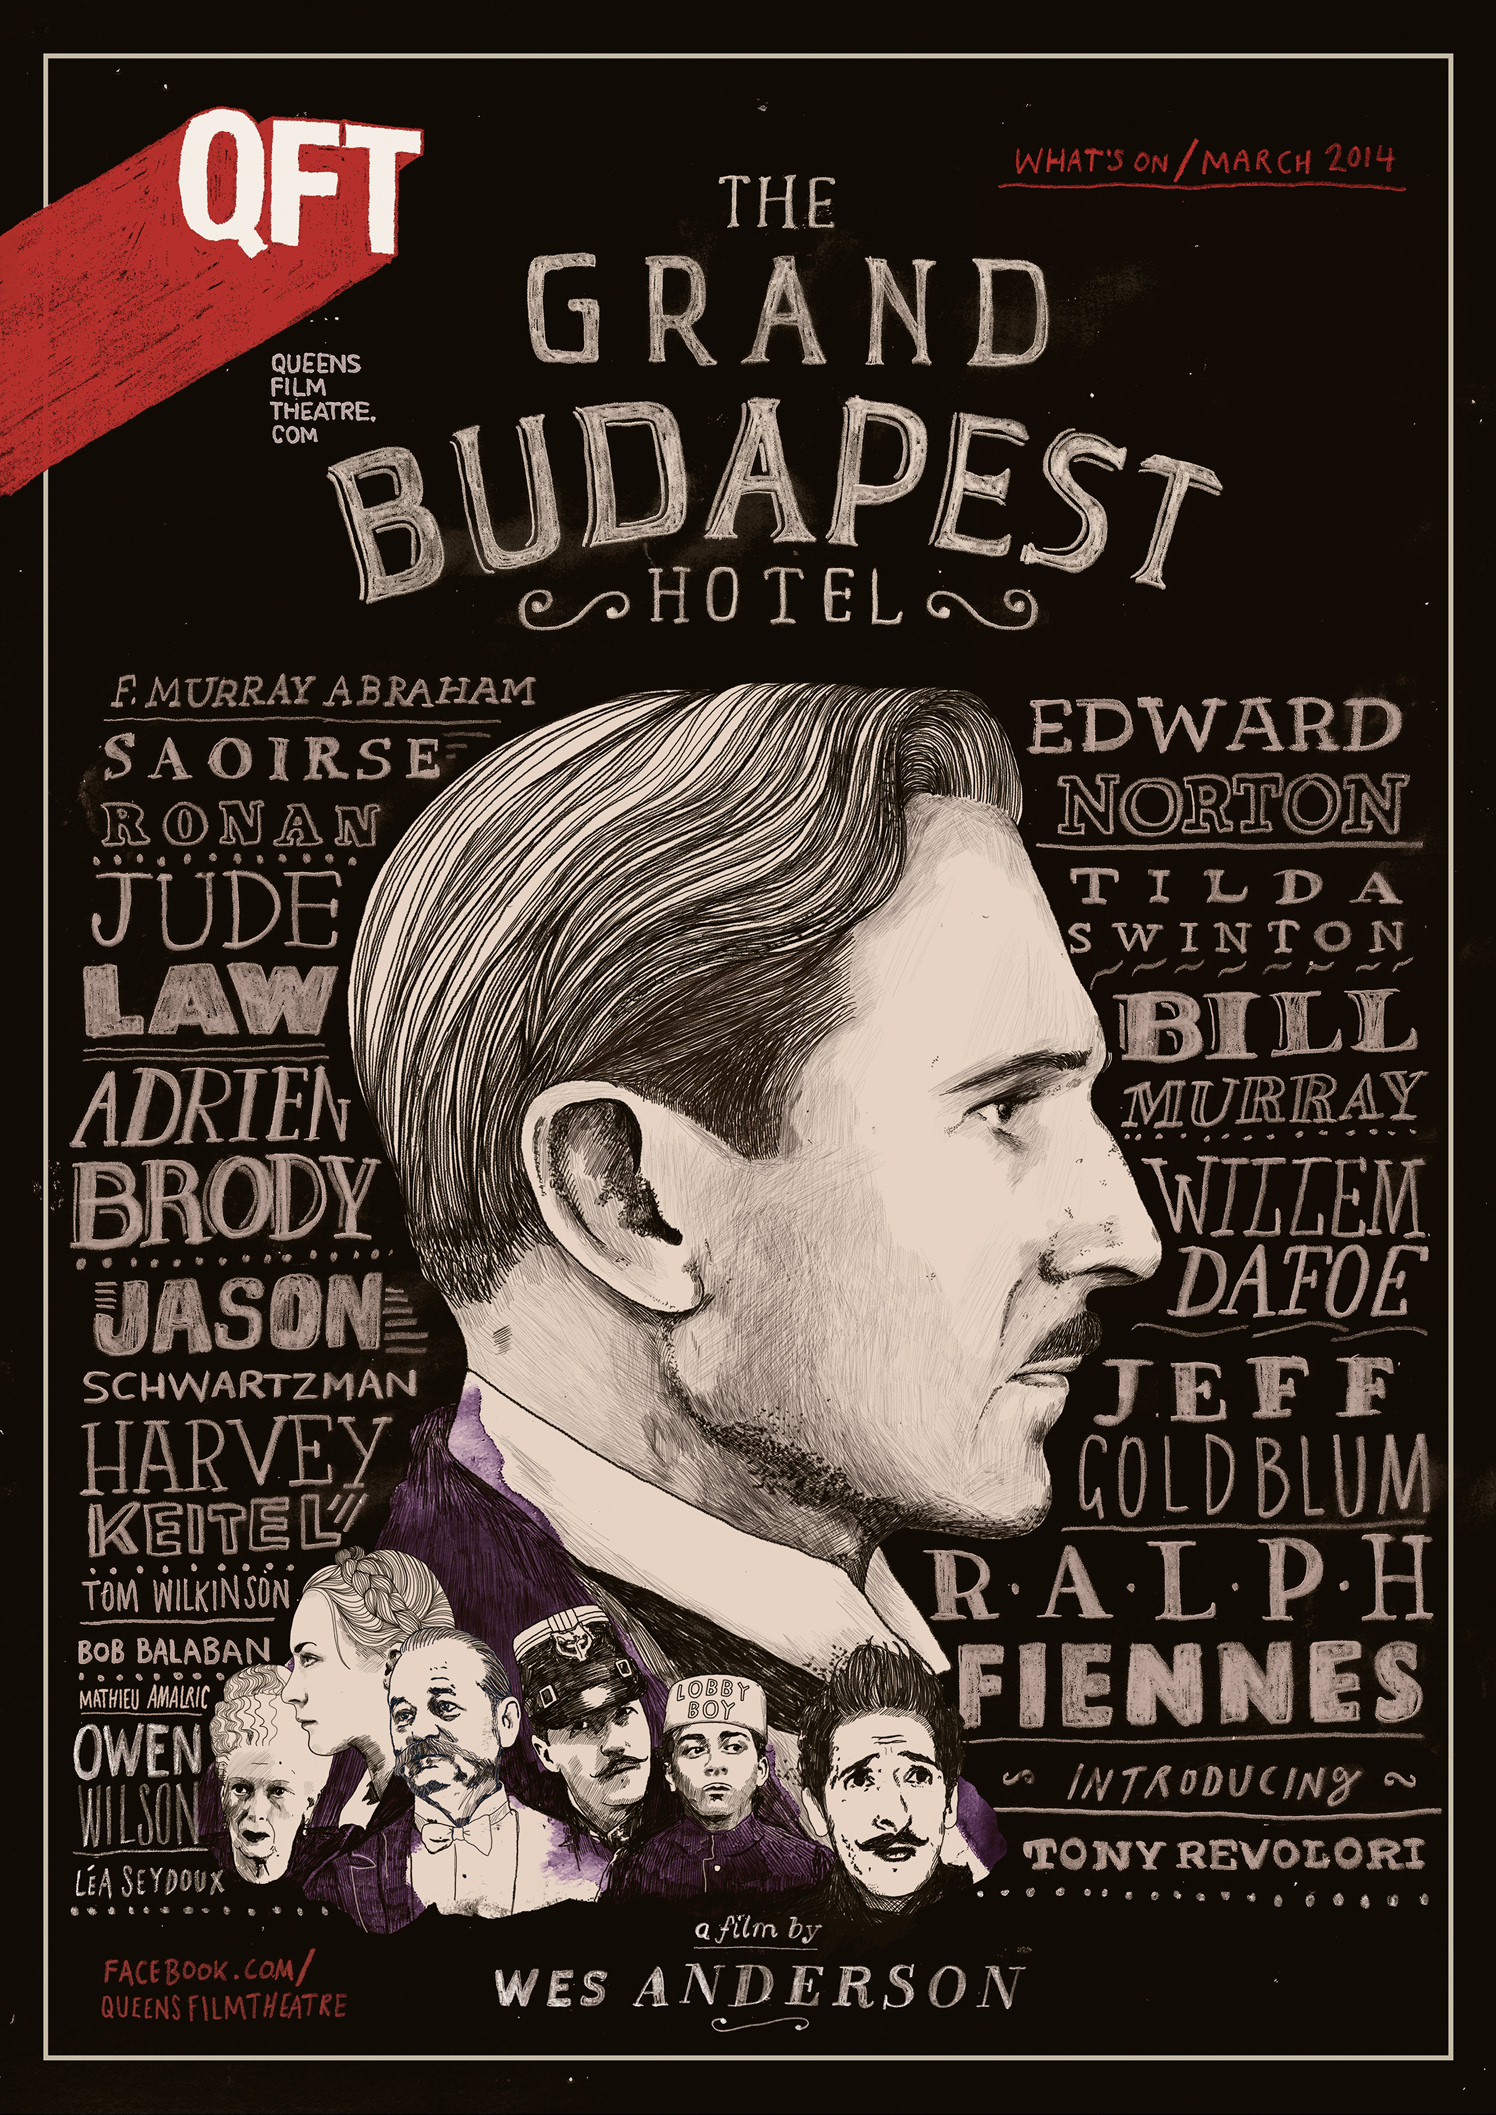 The Grand Budapest Hotel For QFT